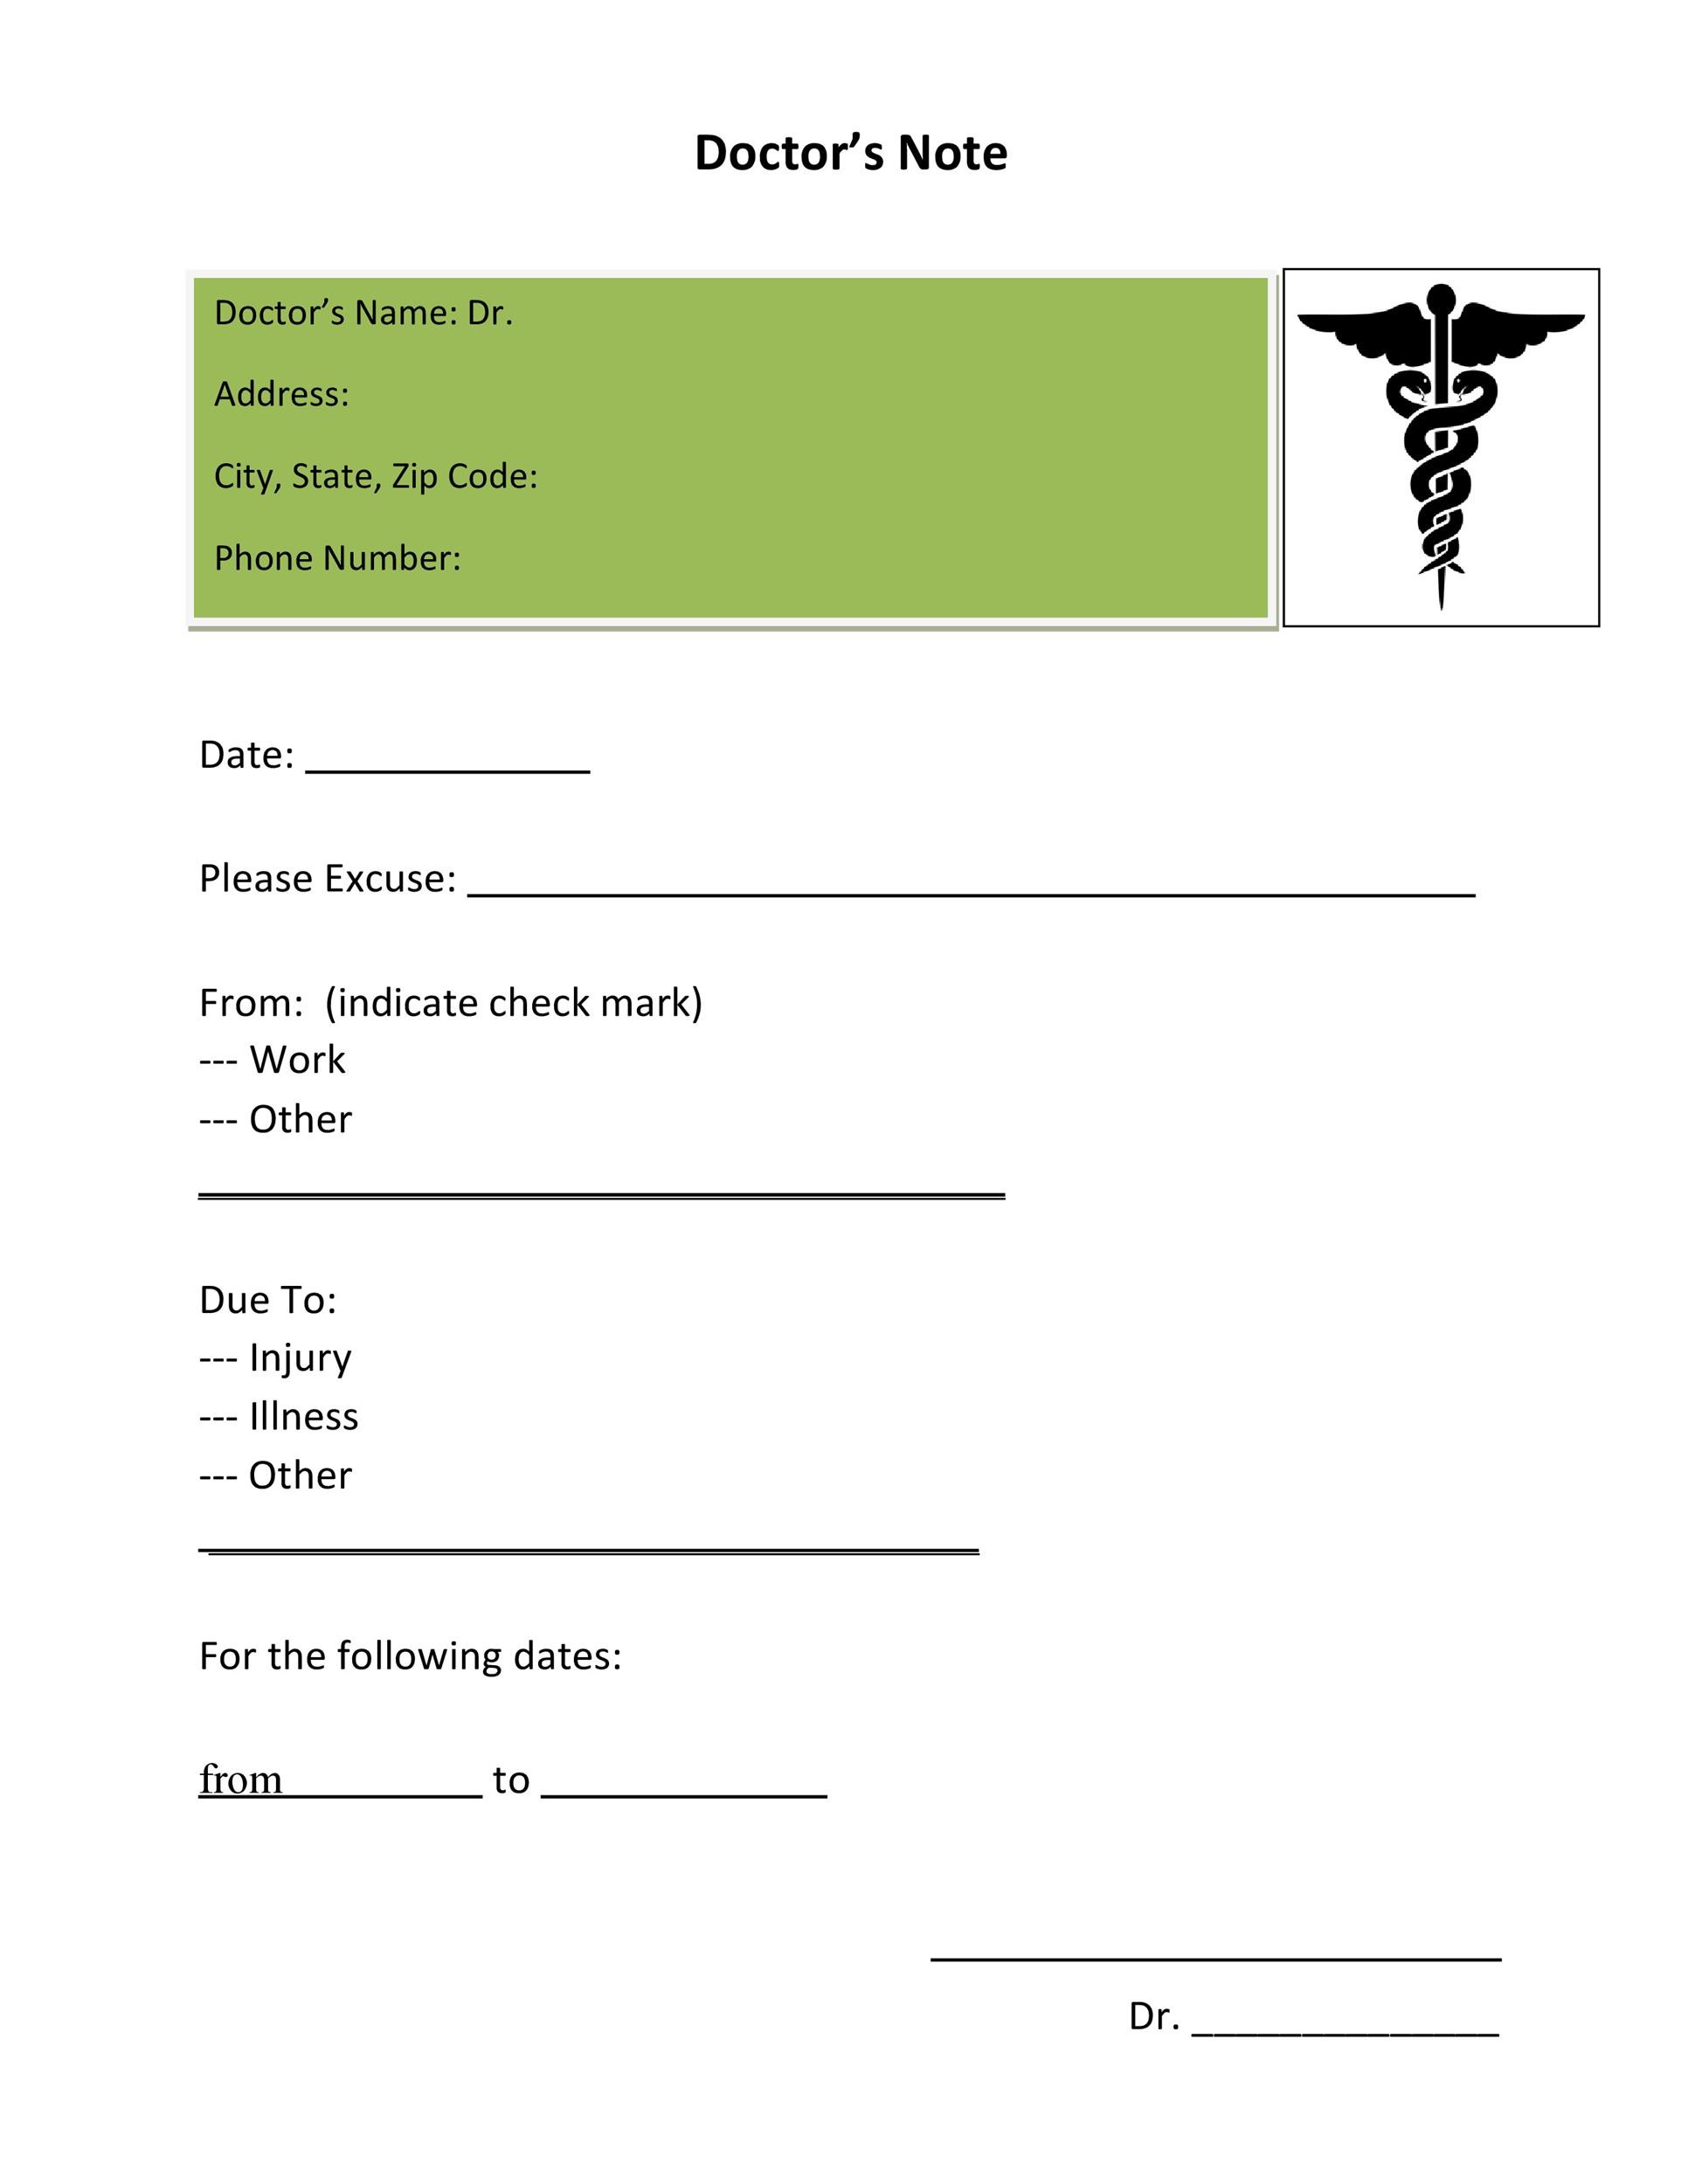 36 Free Doctor Note Templates for Work Or School 